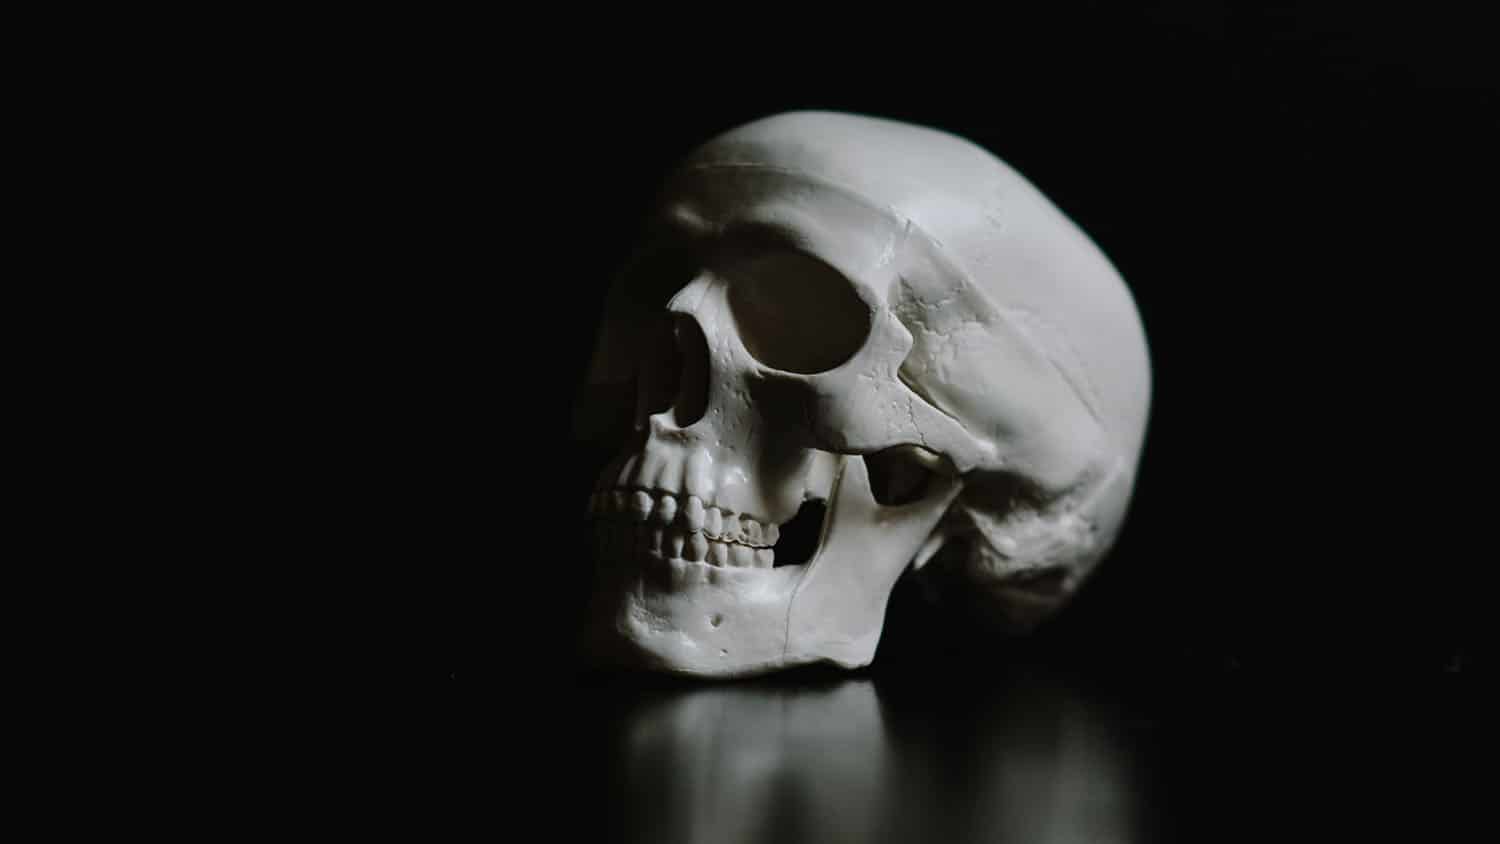 a human skull rests on a glossy black surface in front of a black background